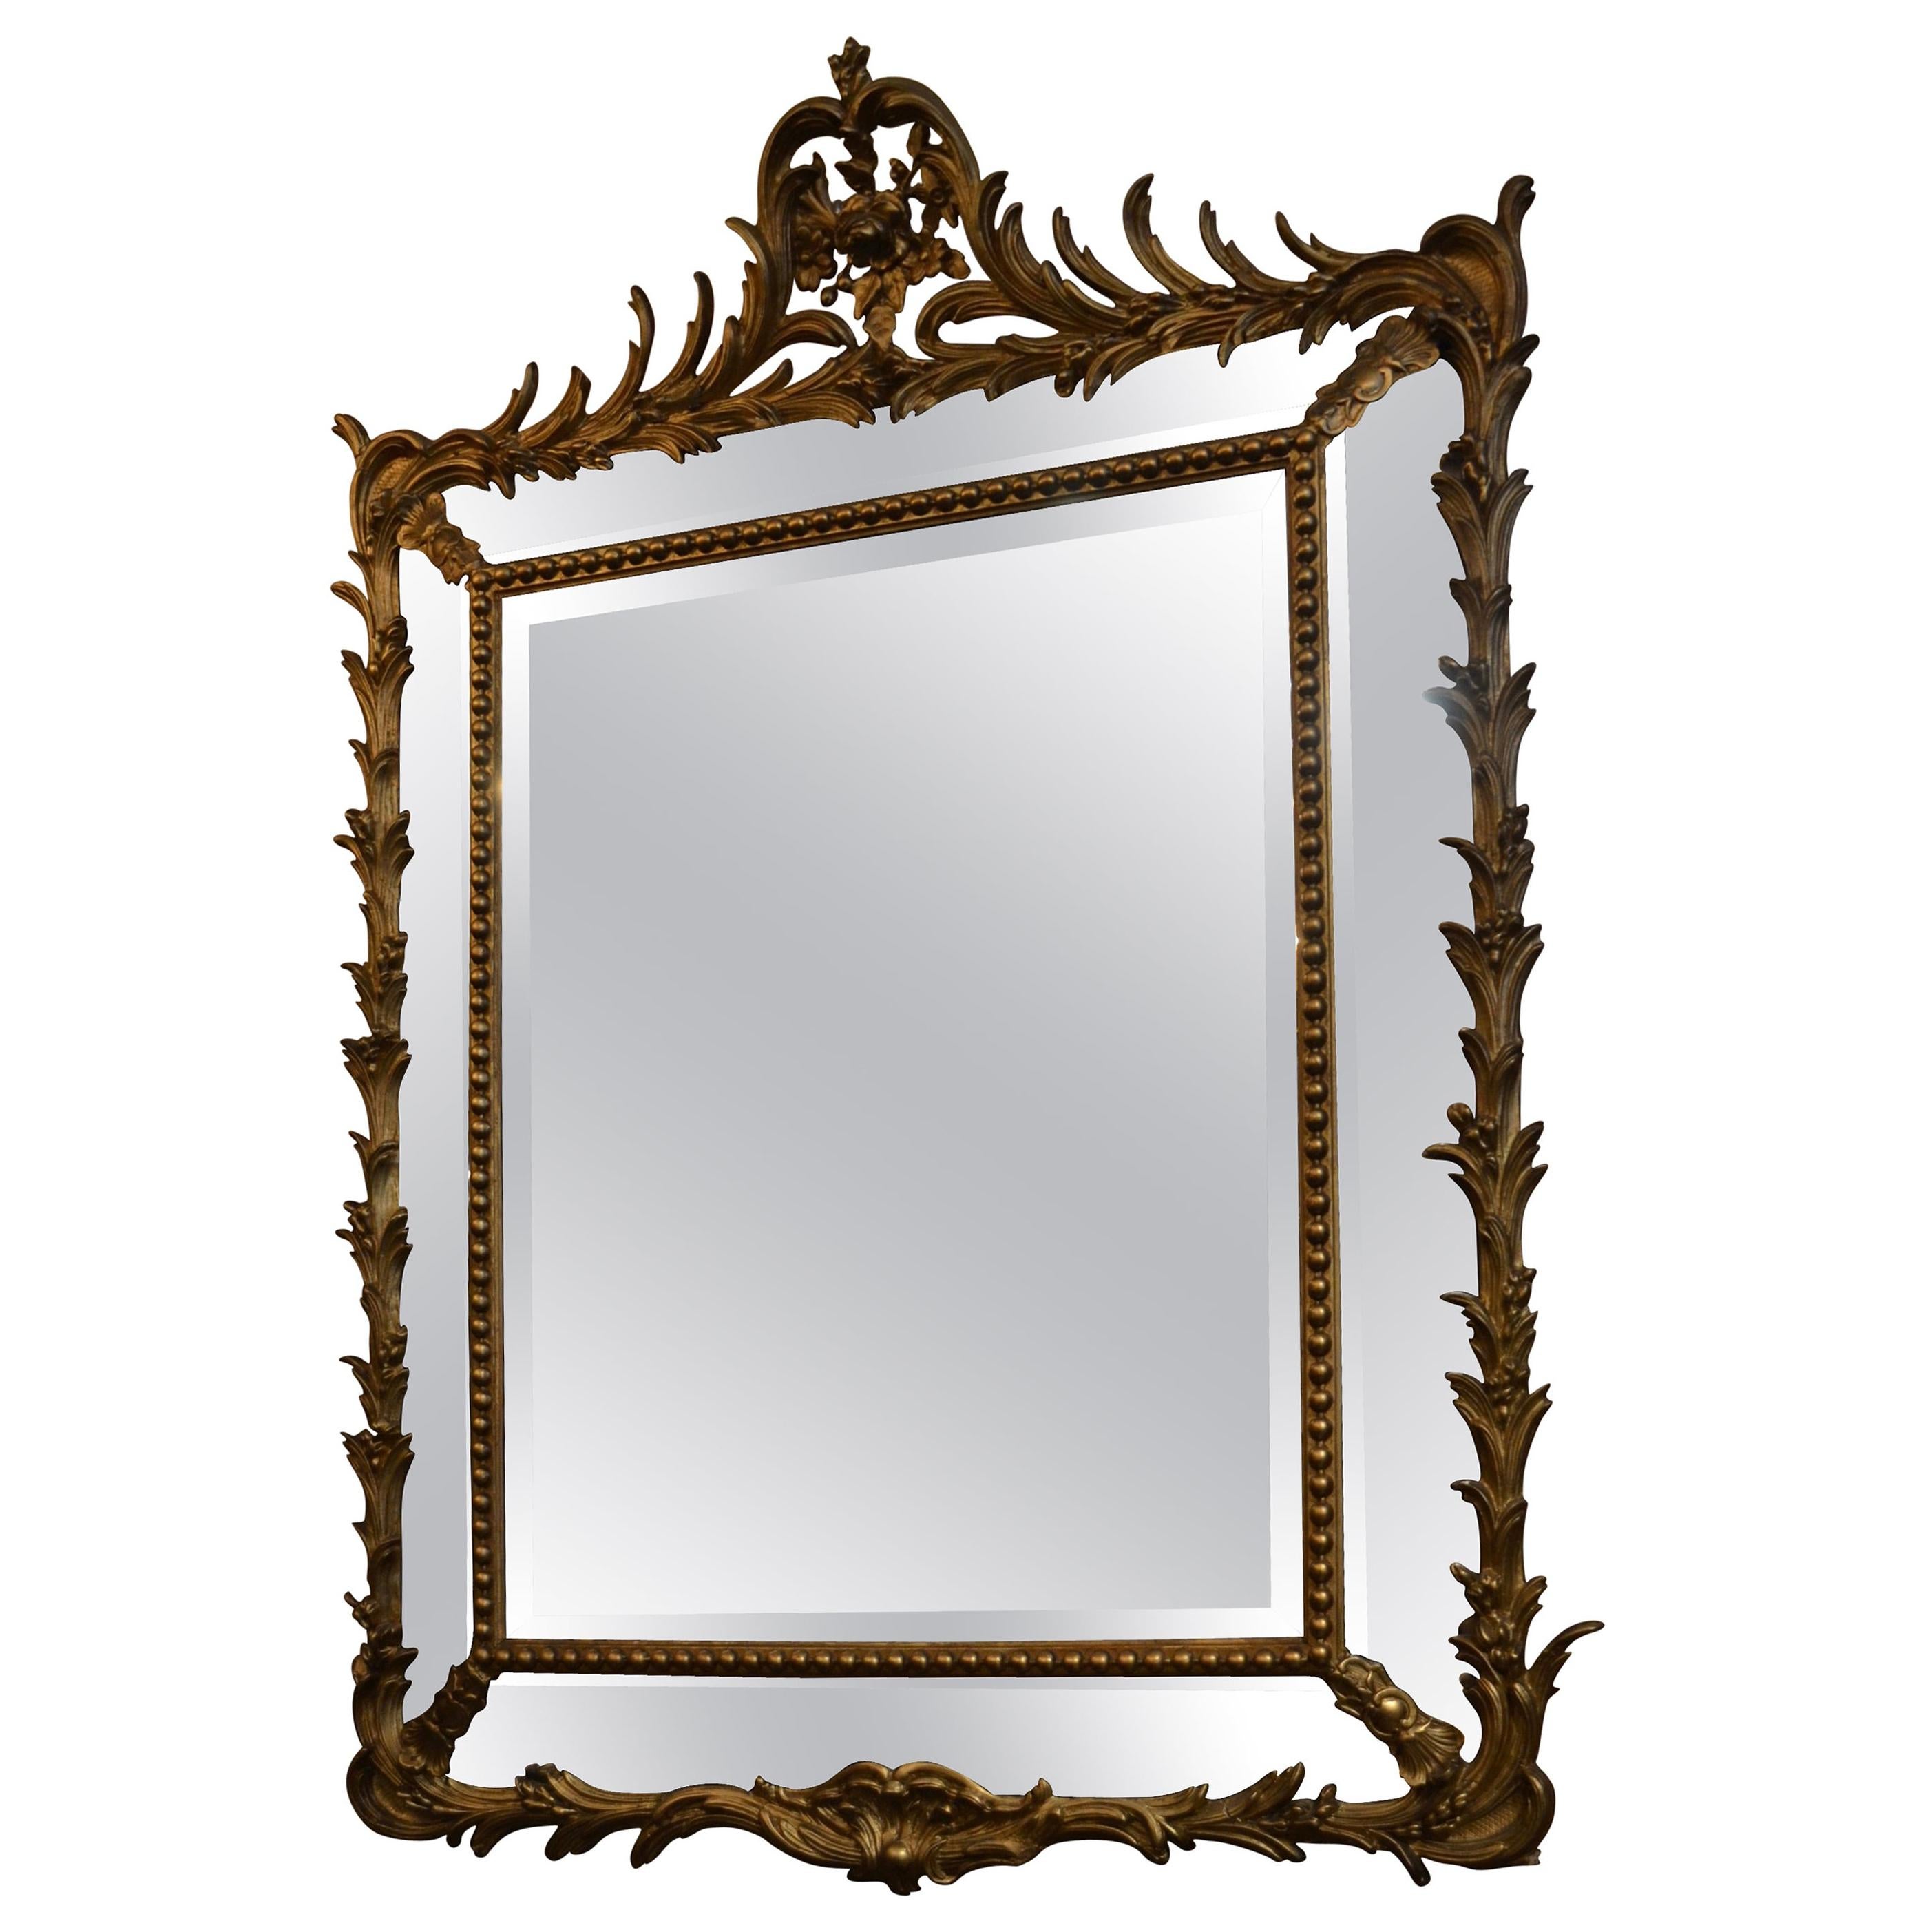 Antique 19th Century French Gold Wood Double Paneled Beveled Mirror, circa 1890